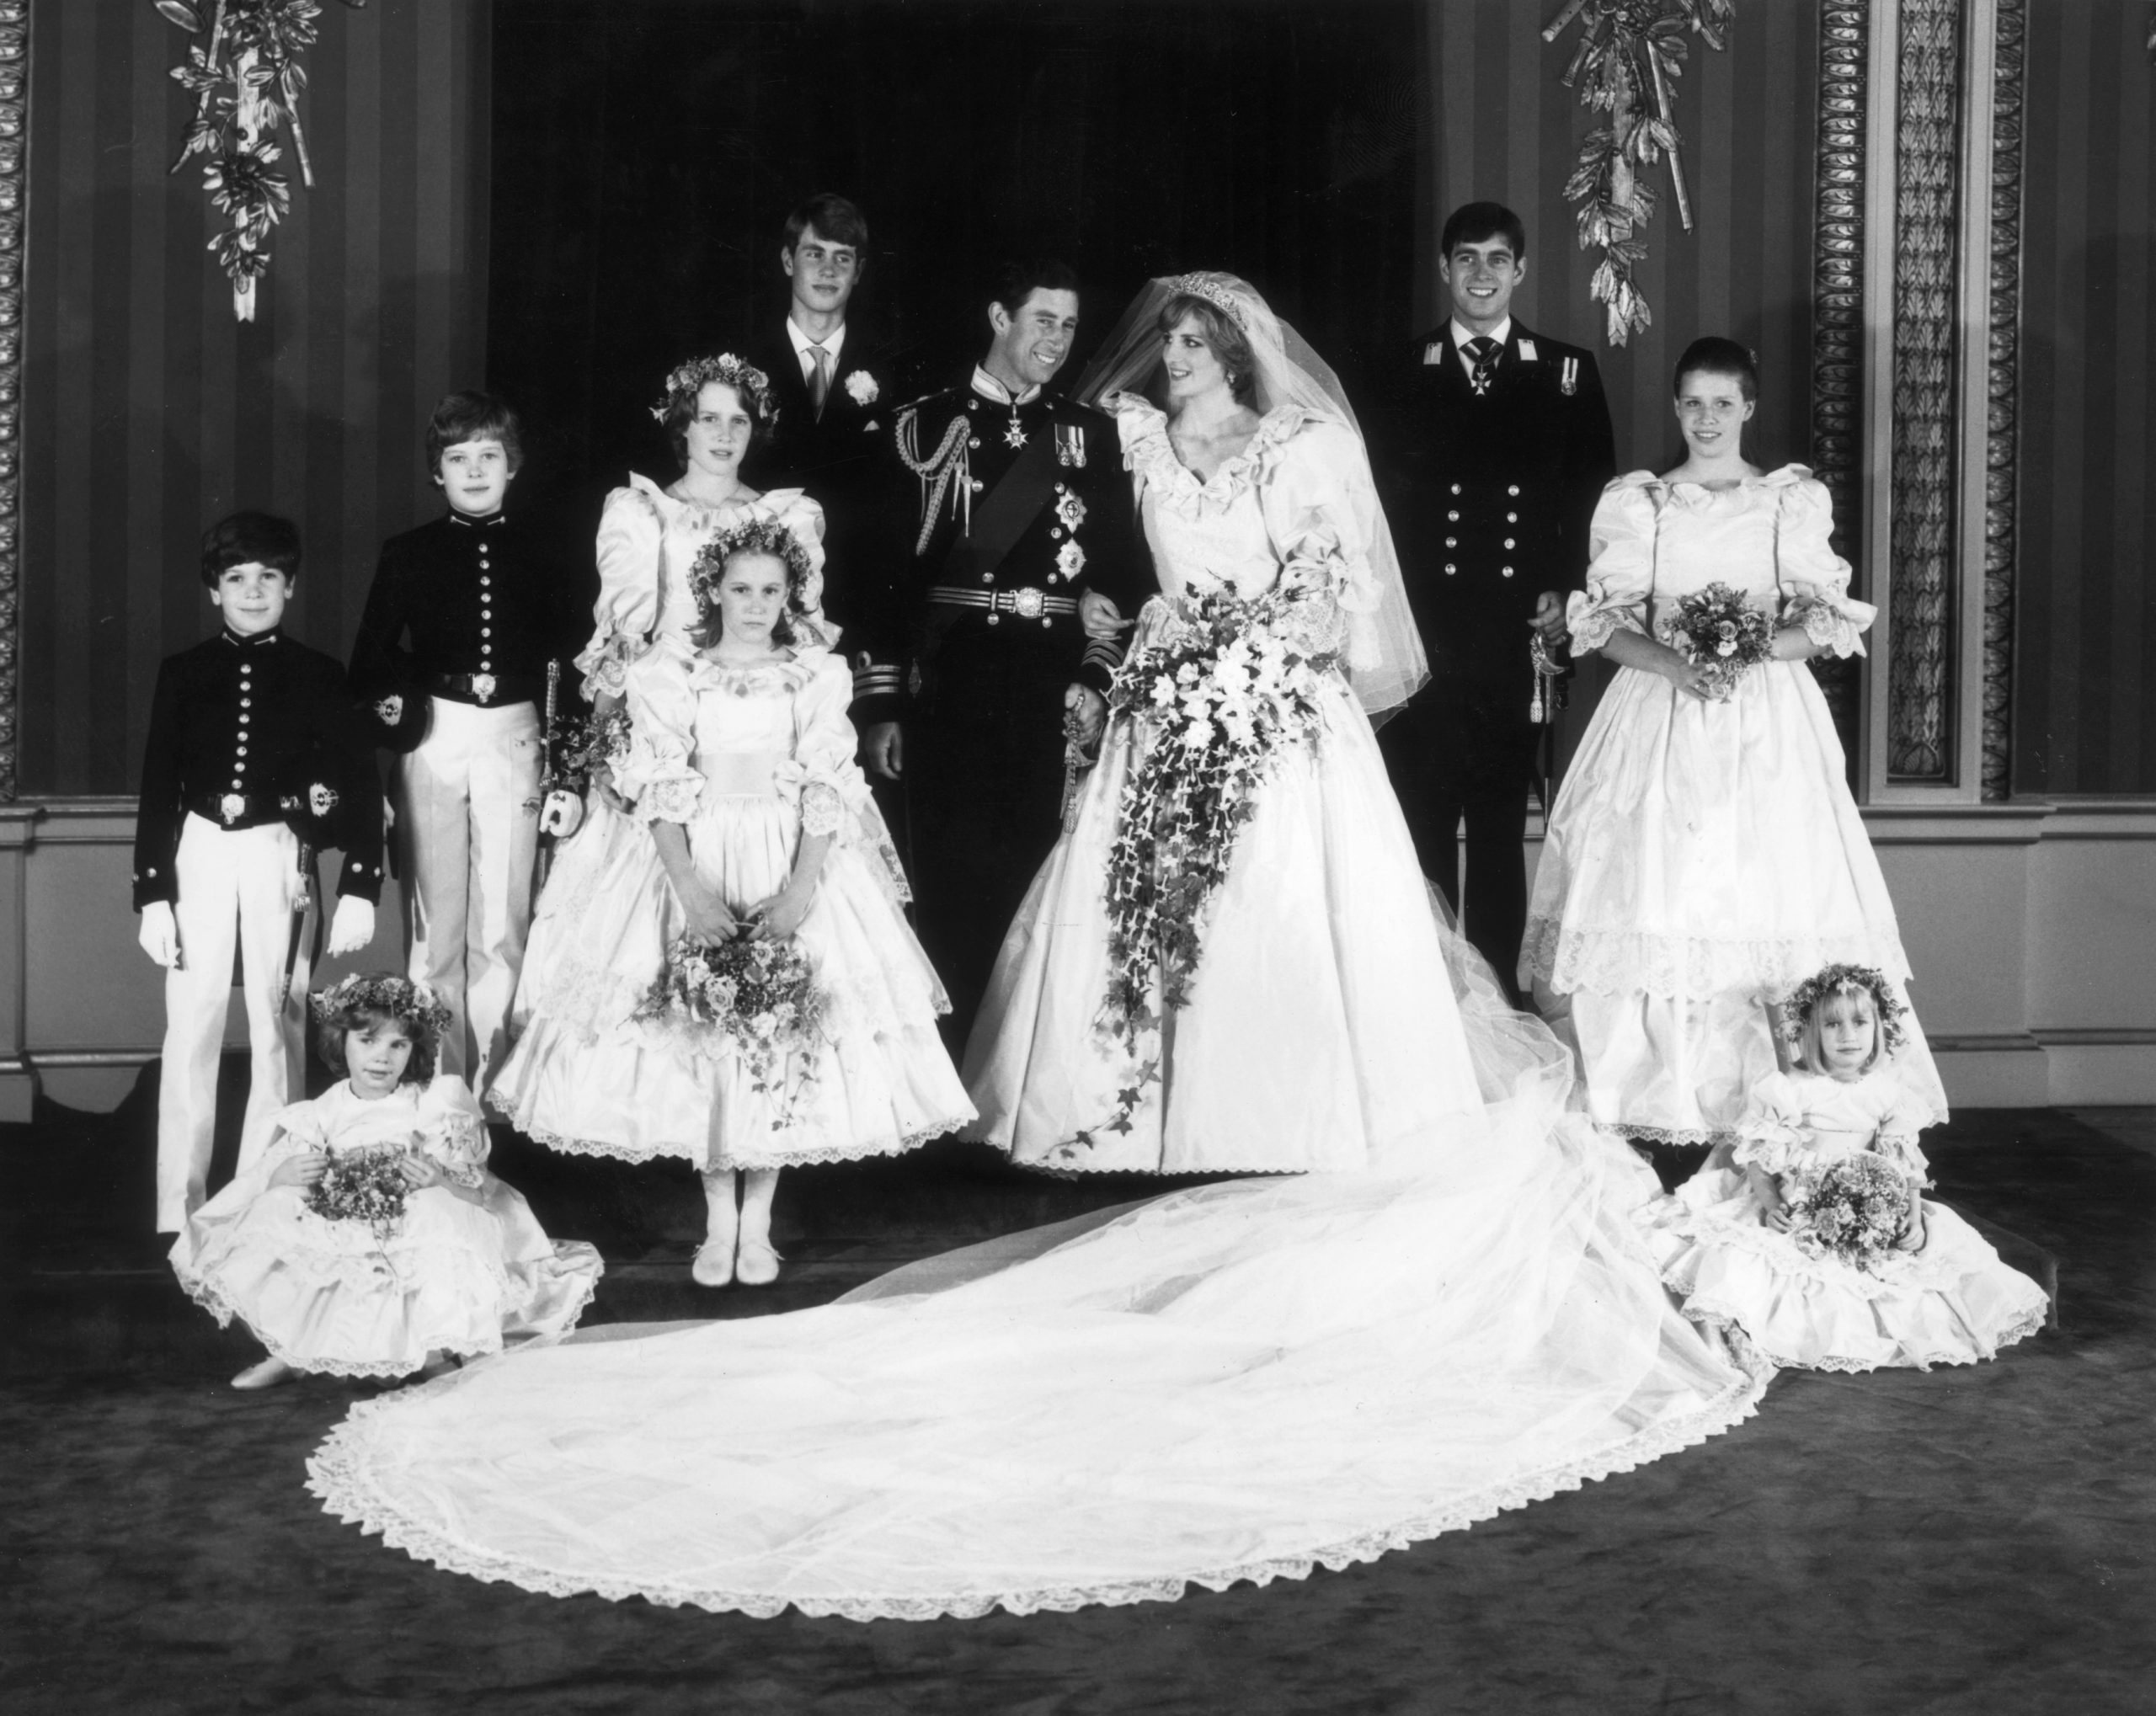 A family group In the throne room of Buckingham Palace after the wedding of Charles, Prince of Wales, and Princess Diana